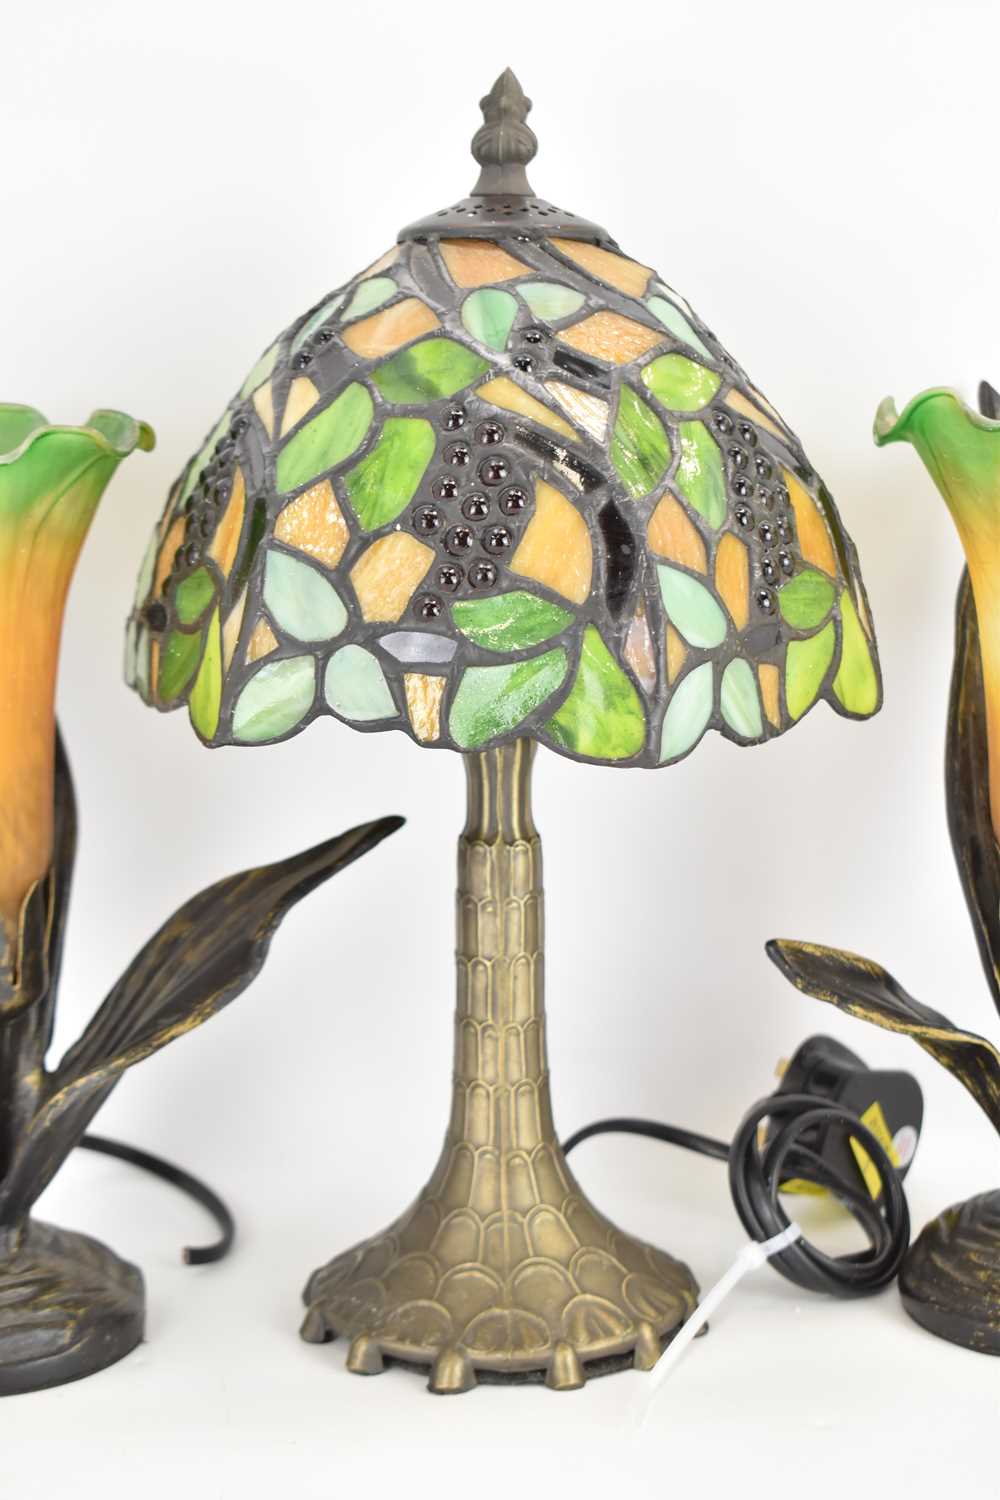 A small modern Tiffany-style table lamp with grape and leaf design, height 32cm, and a pair of - Image 3 of 4